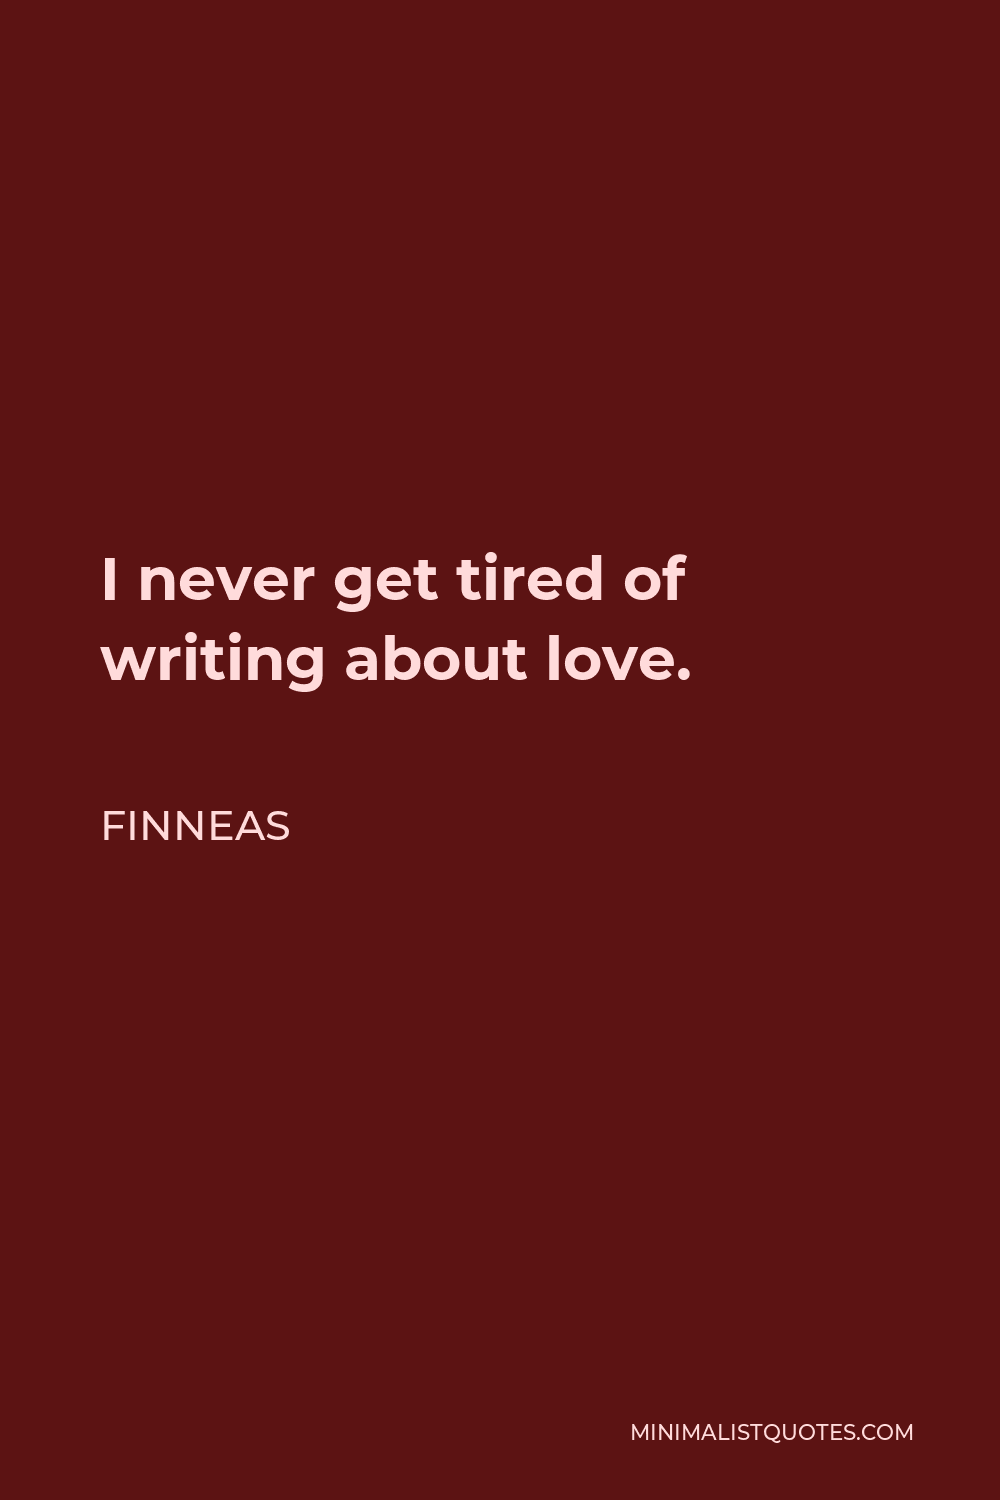 Finneas Quote - I never get tired of writing about love.